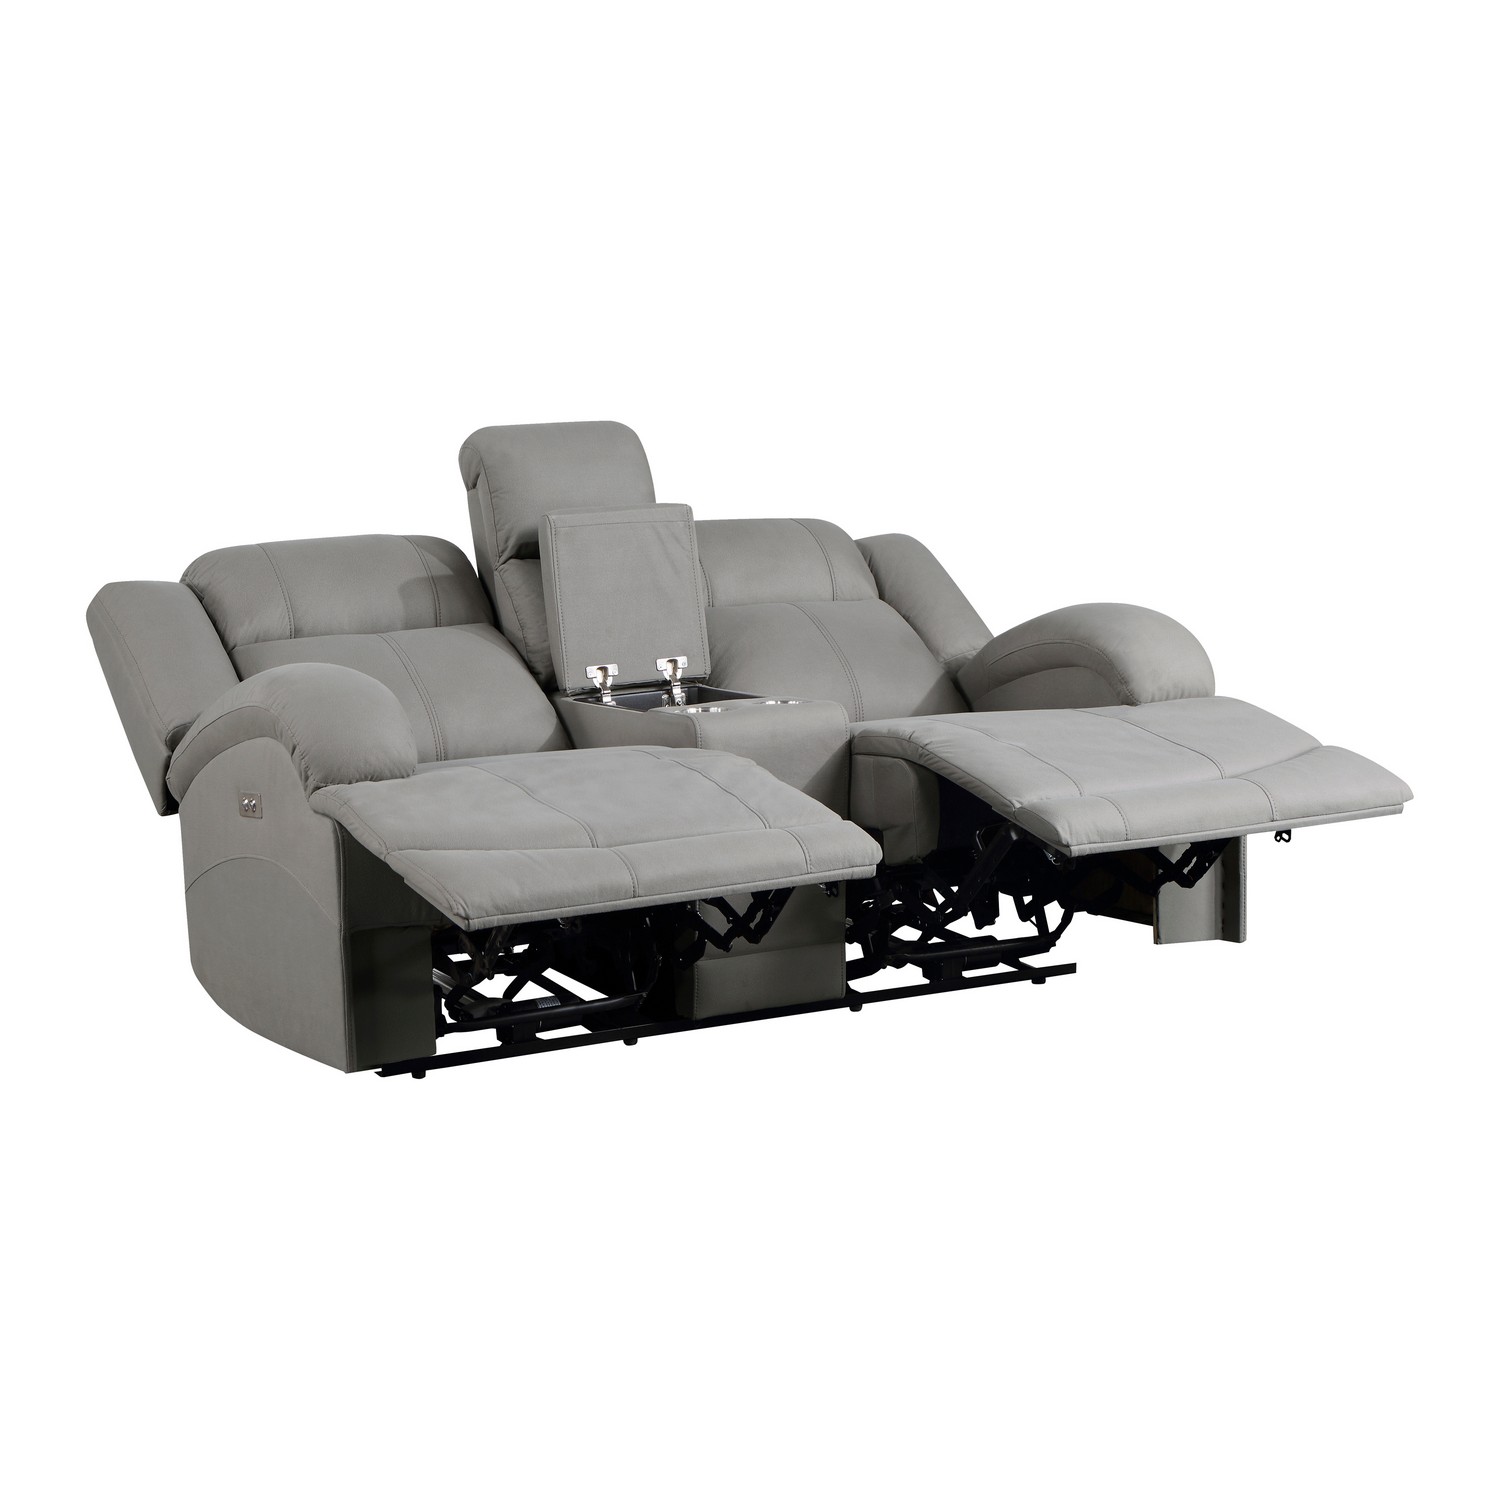 Homelegance Camryn Power Double Reclining Love Seat - Gray